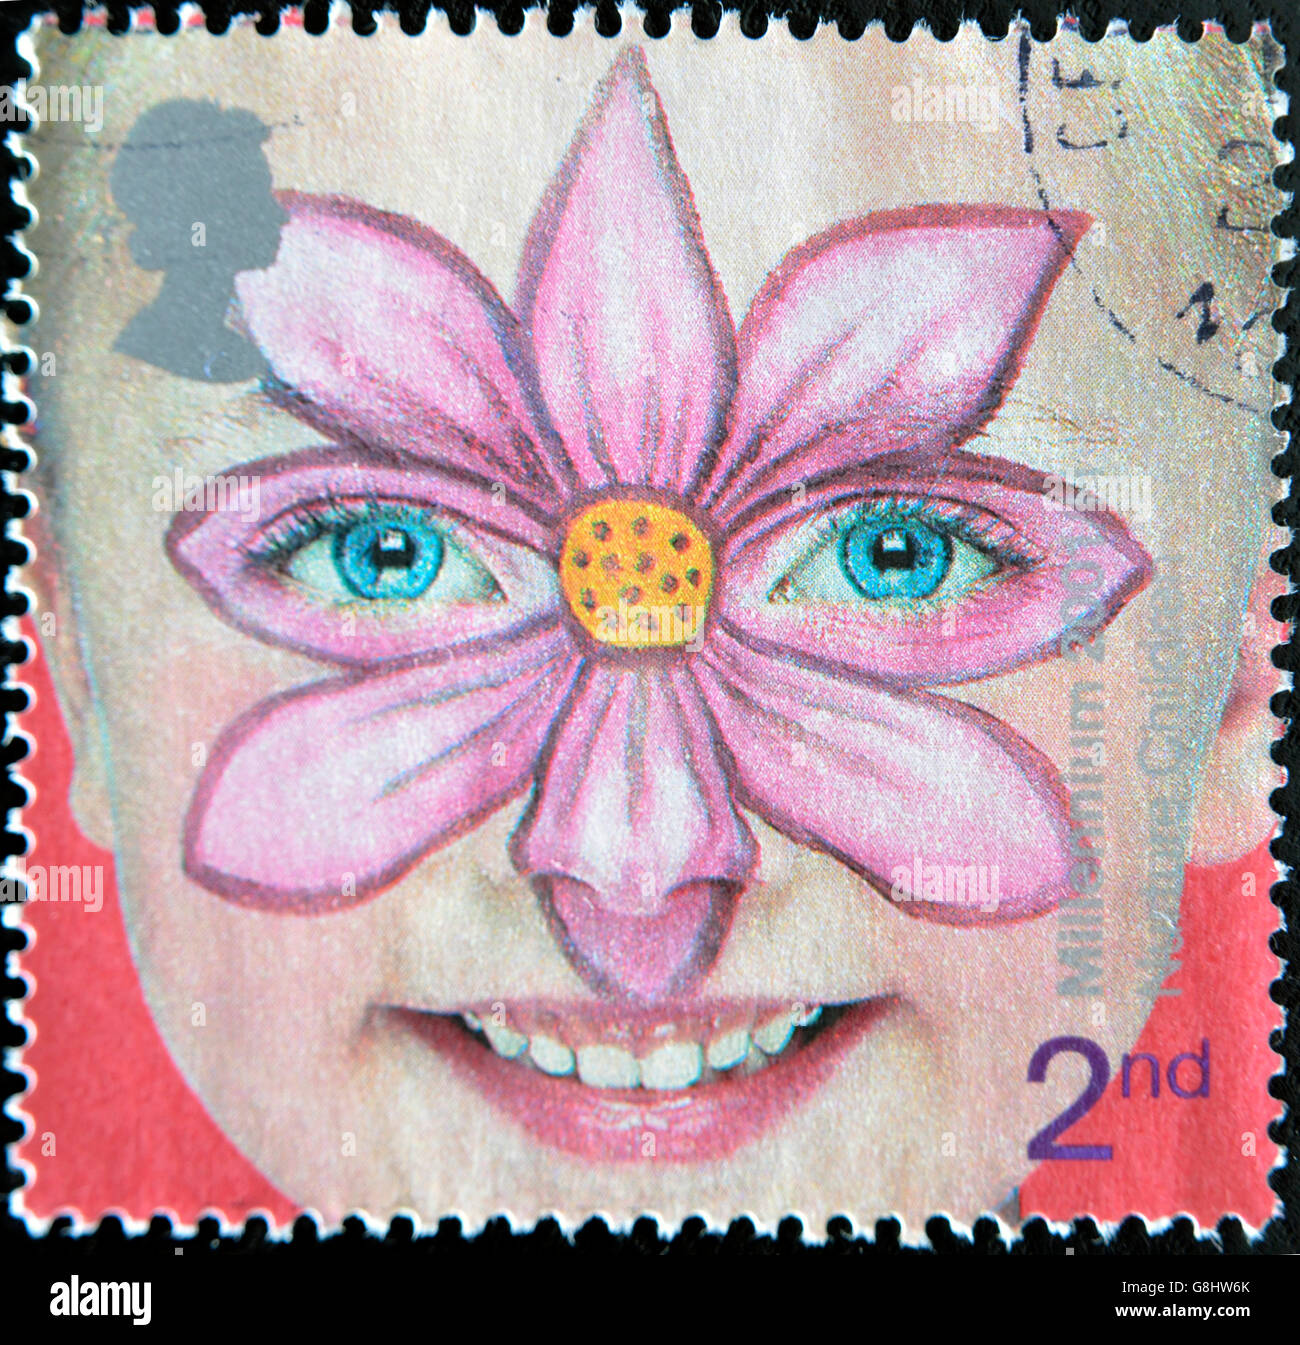 CIRCA 2001: A stamp printed in England, is dedicated to painted faces of children, flower, circa 2001 Stock Photo